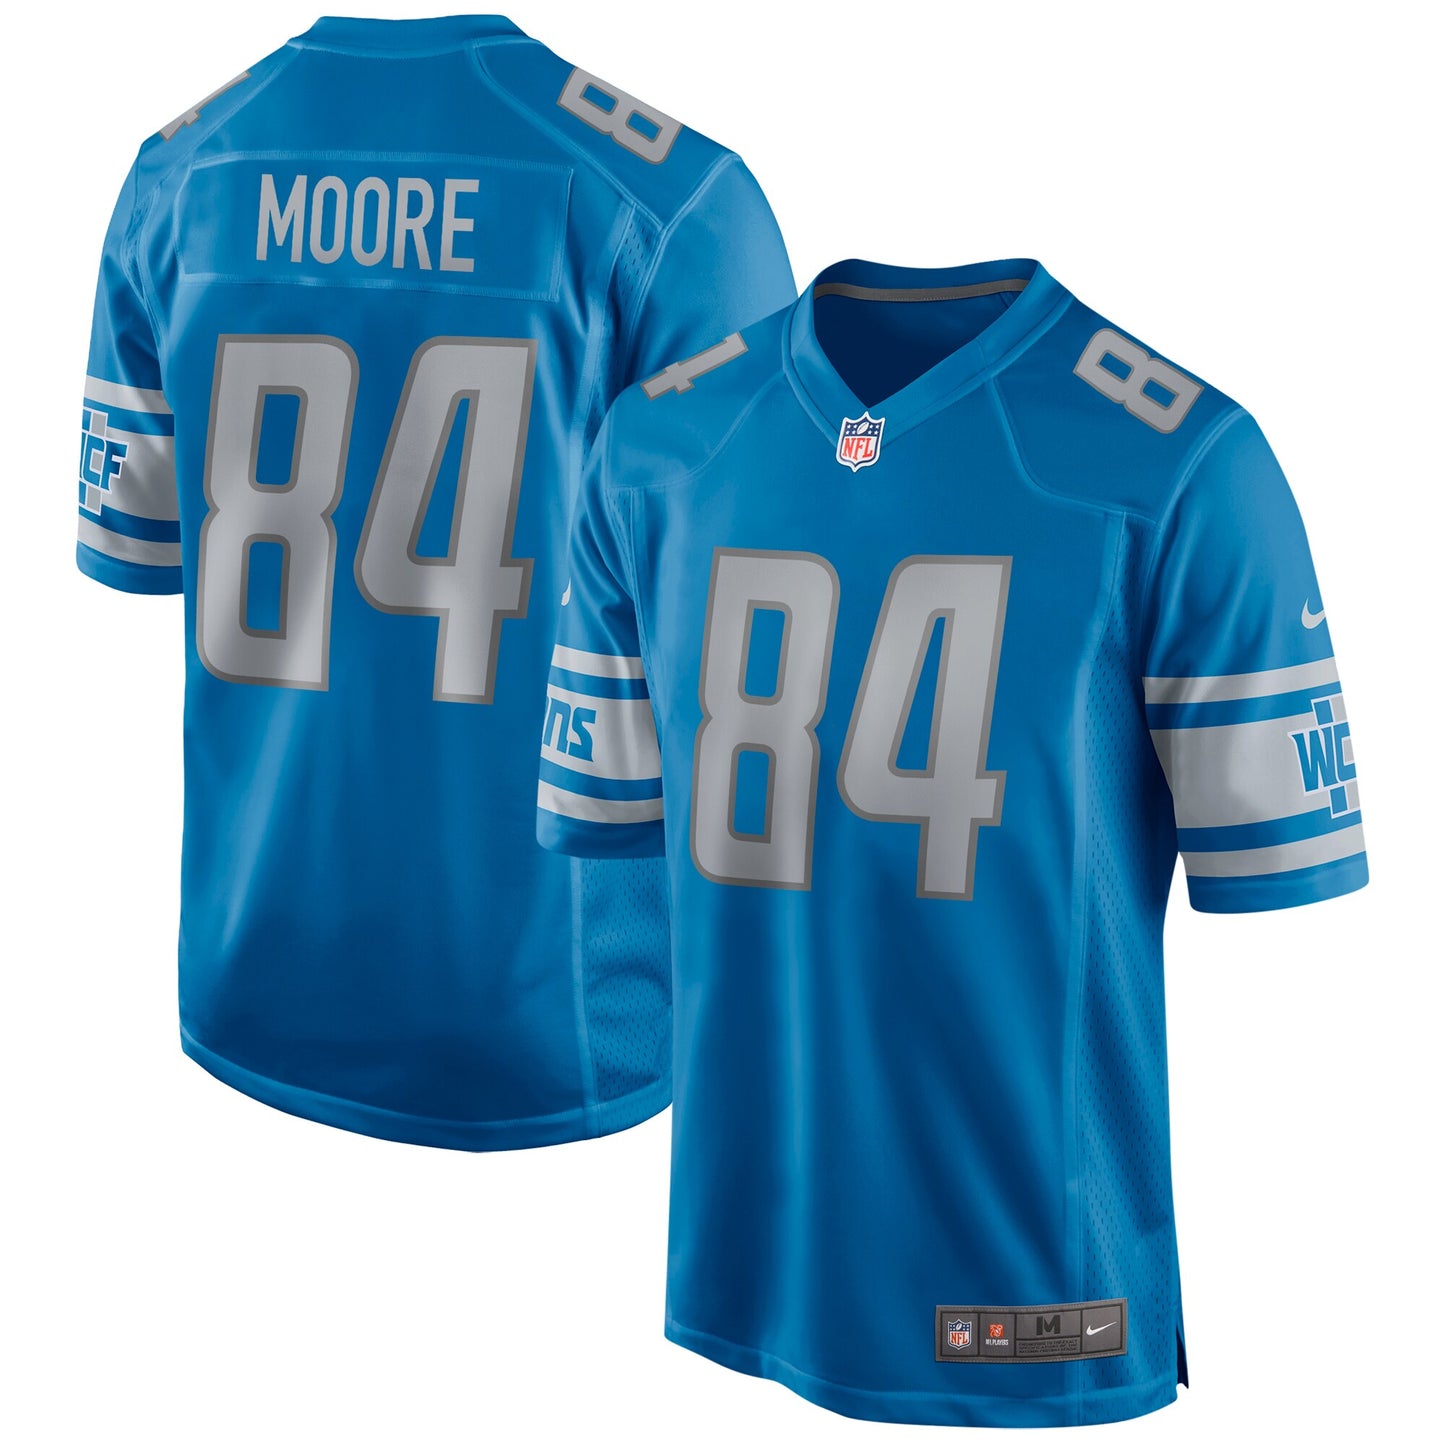 Herman Moore Detroit Lions Nike Game Retired Player Jersey - Blue